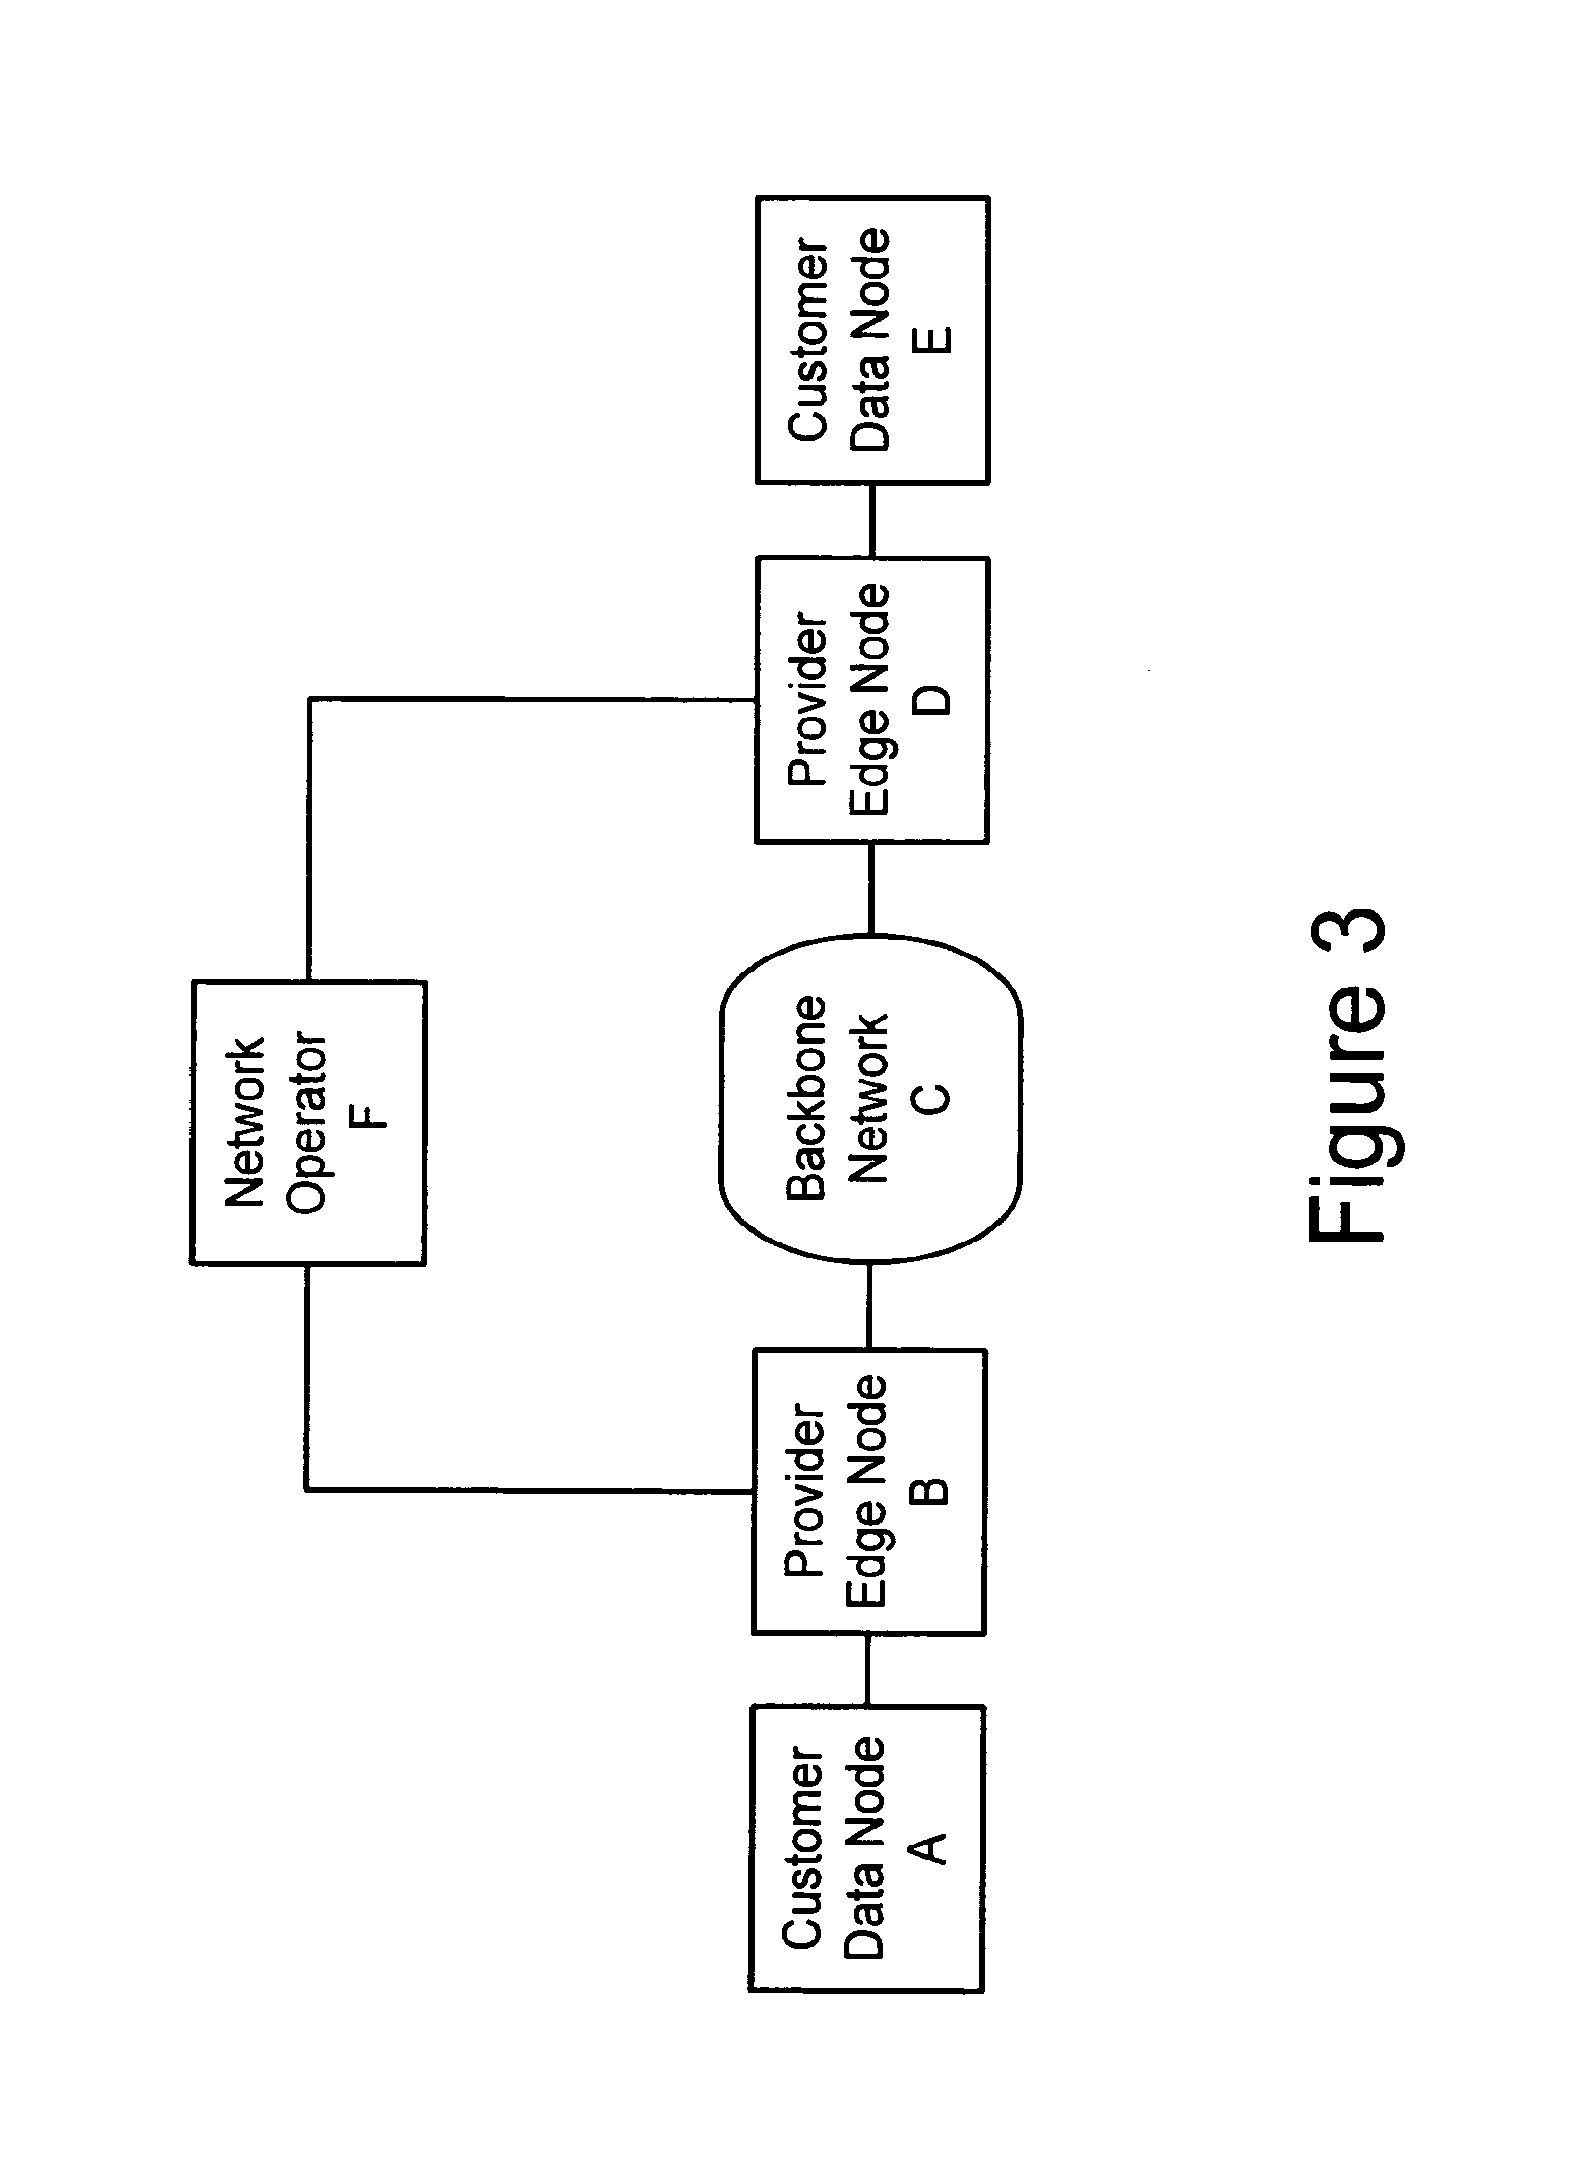 Method and apparatus for performing data flow ingress/egress admission control in a provider network